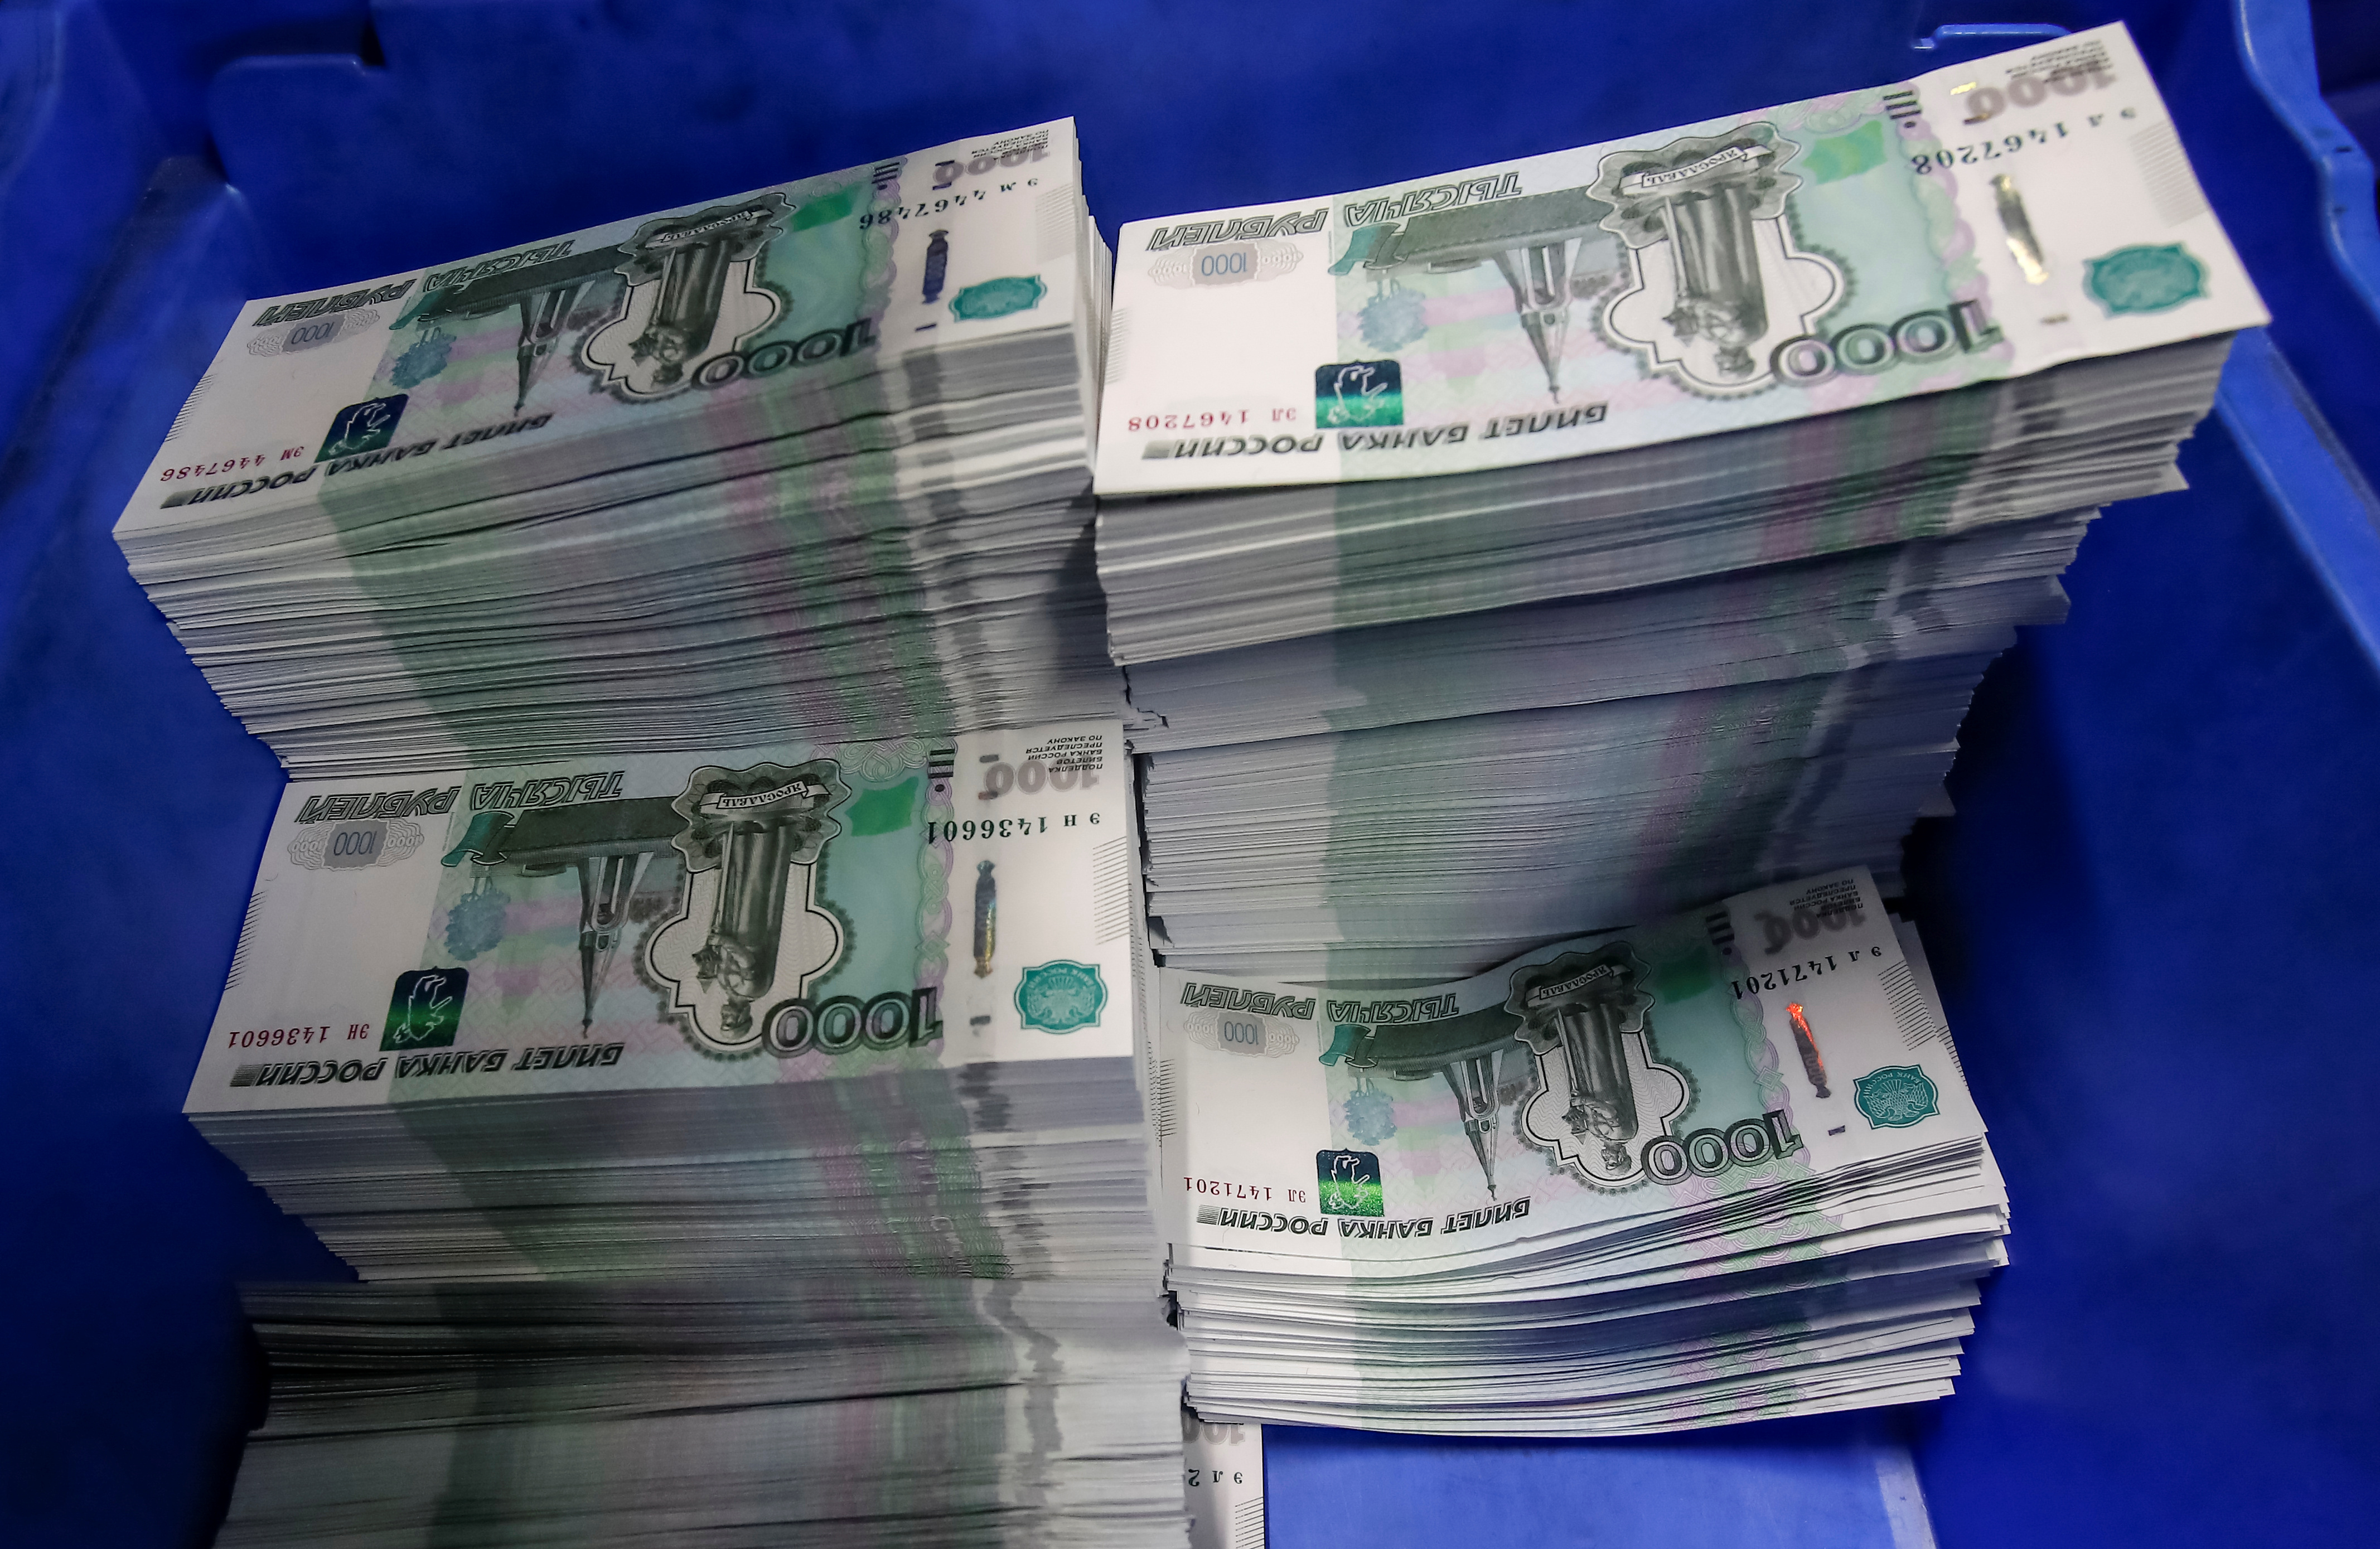 Stacks of 1000 Russian Roubles notes are pictured at Goznak printing factory in Moscow